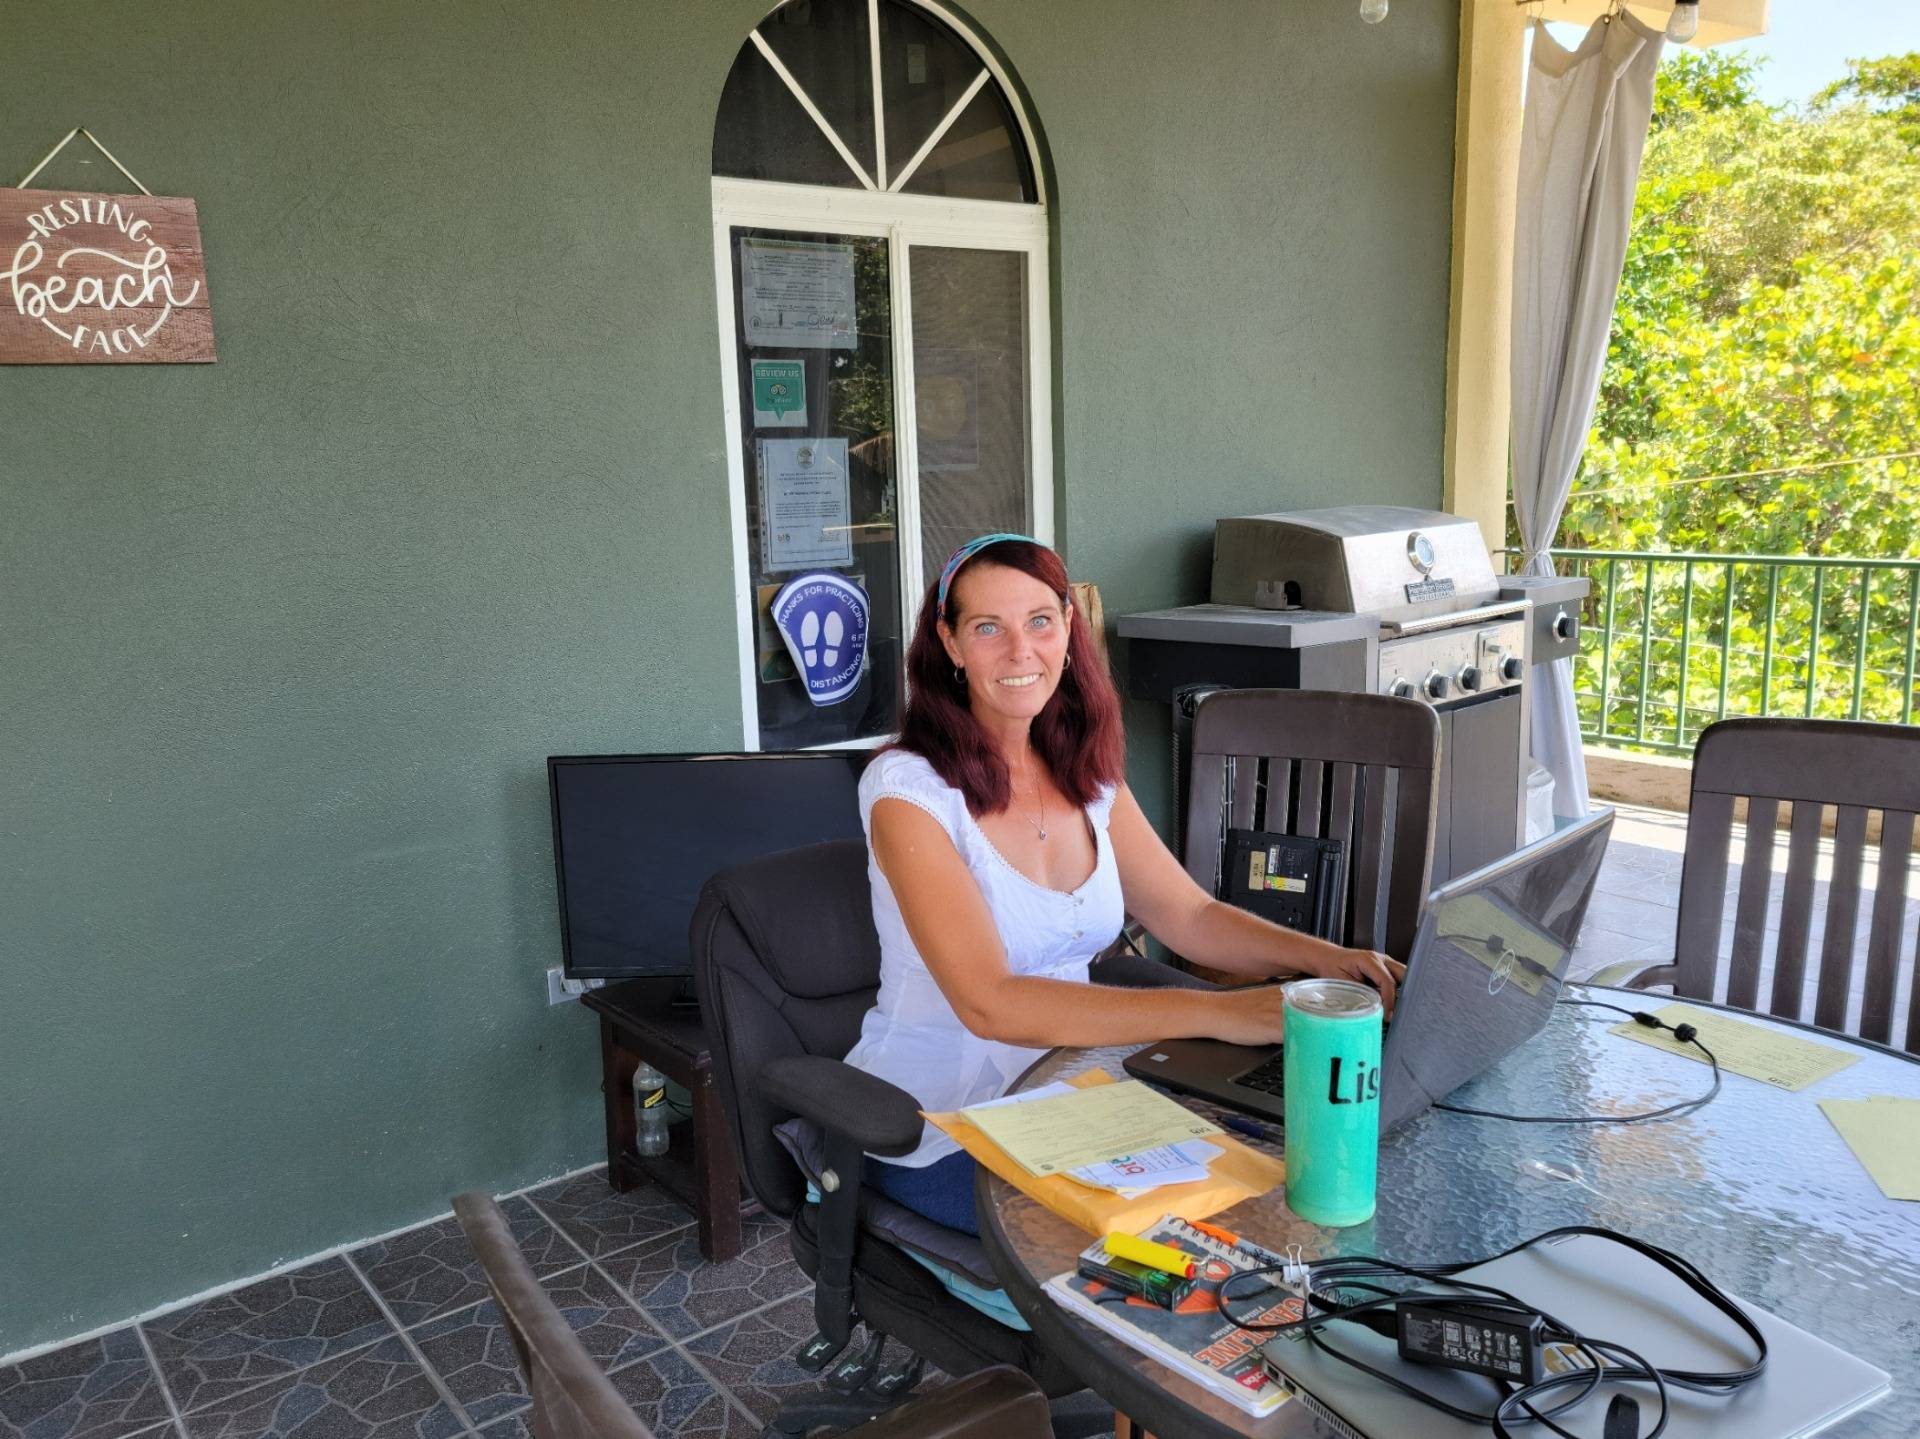 Lisa hard at work in her favorite location, the balcony office!